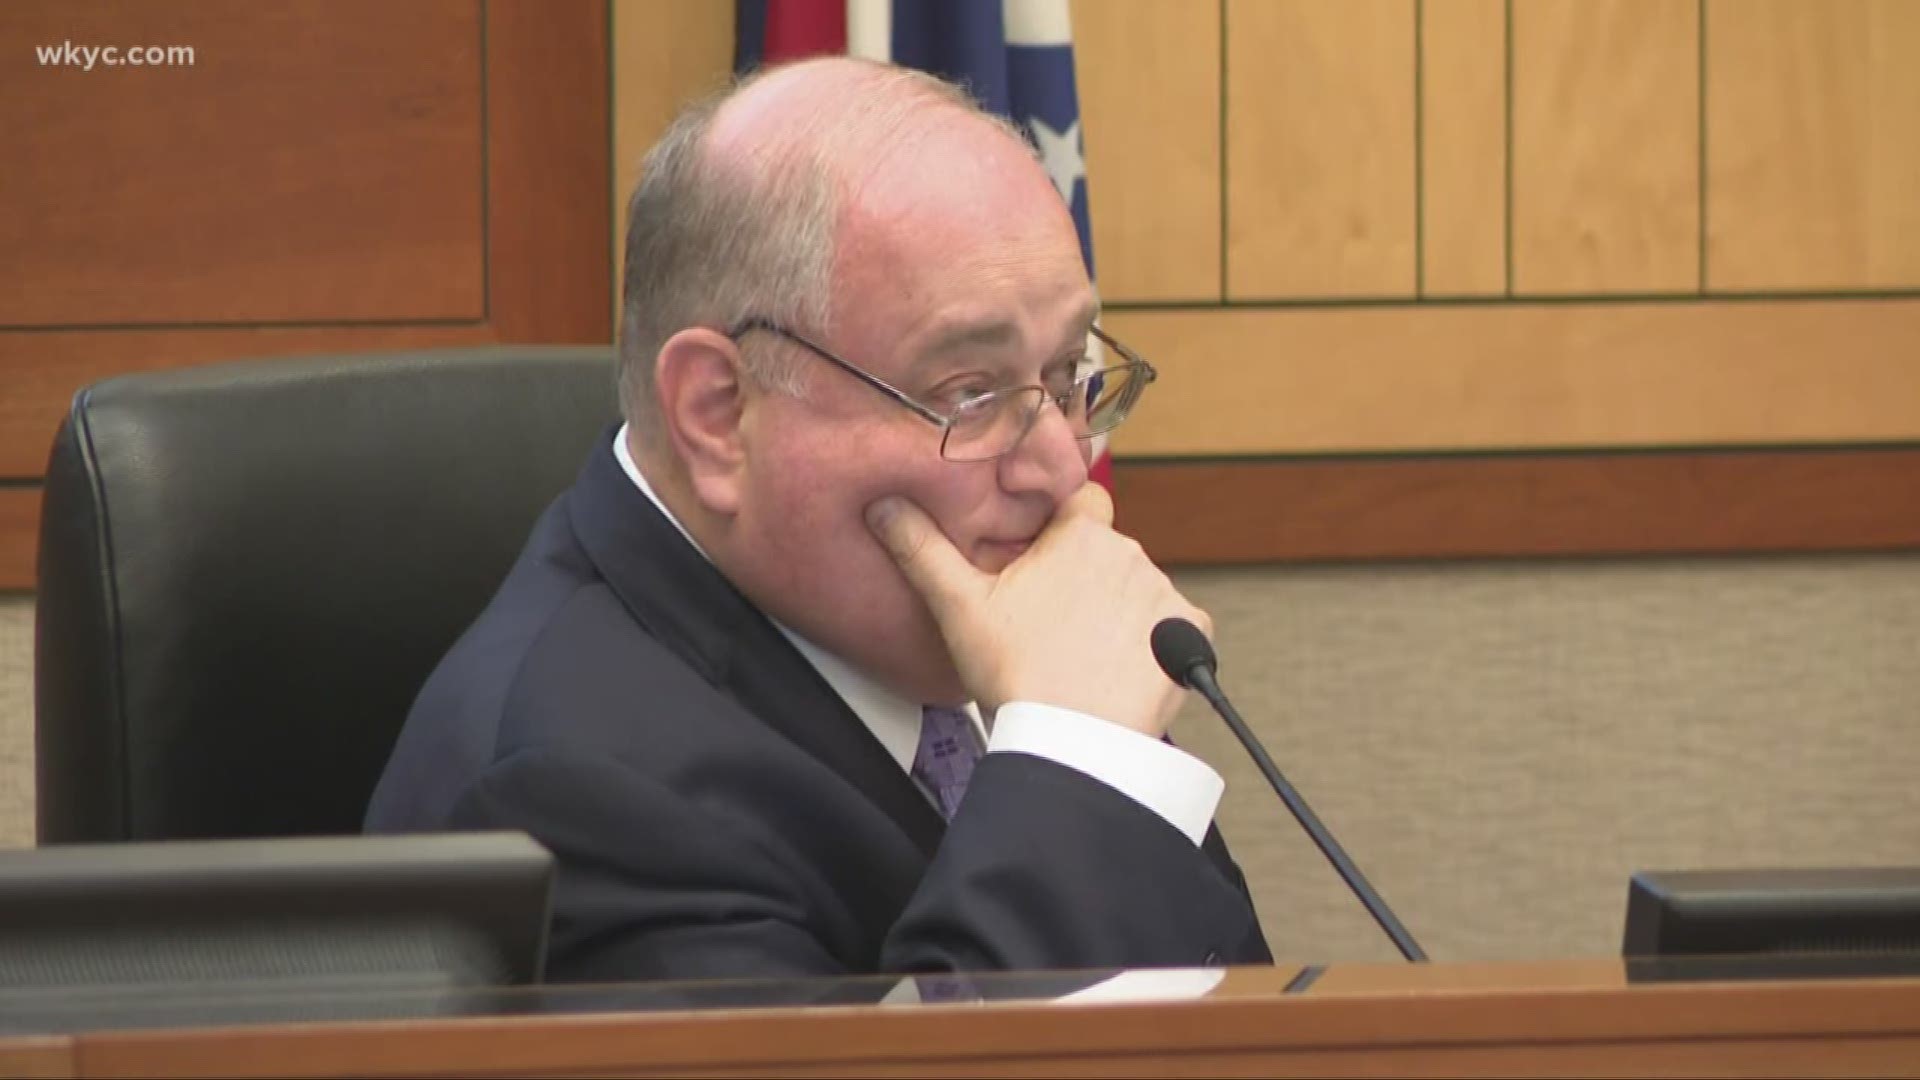 It was a tense night of emotions and drama in Beachwood as city council took a vote to fire Mayor Martin Horwitz. He faced multiple allegations of harassment.